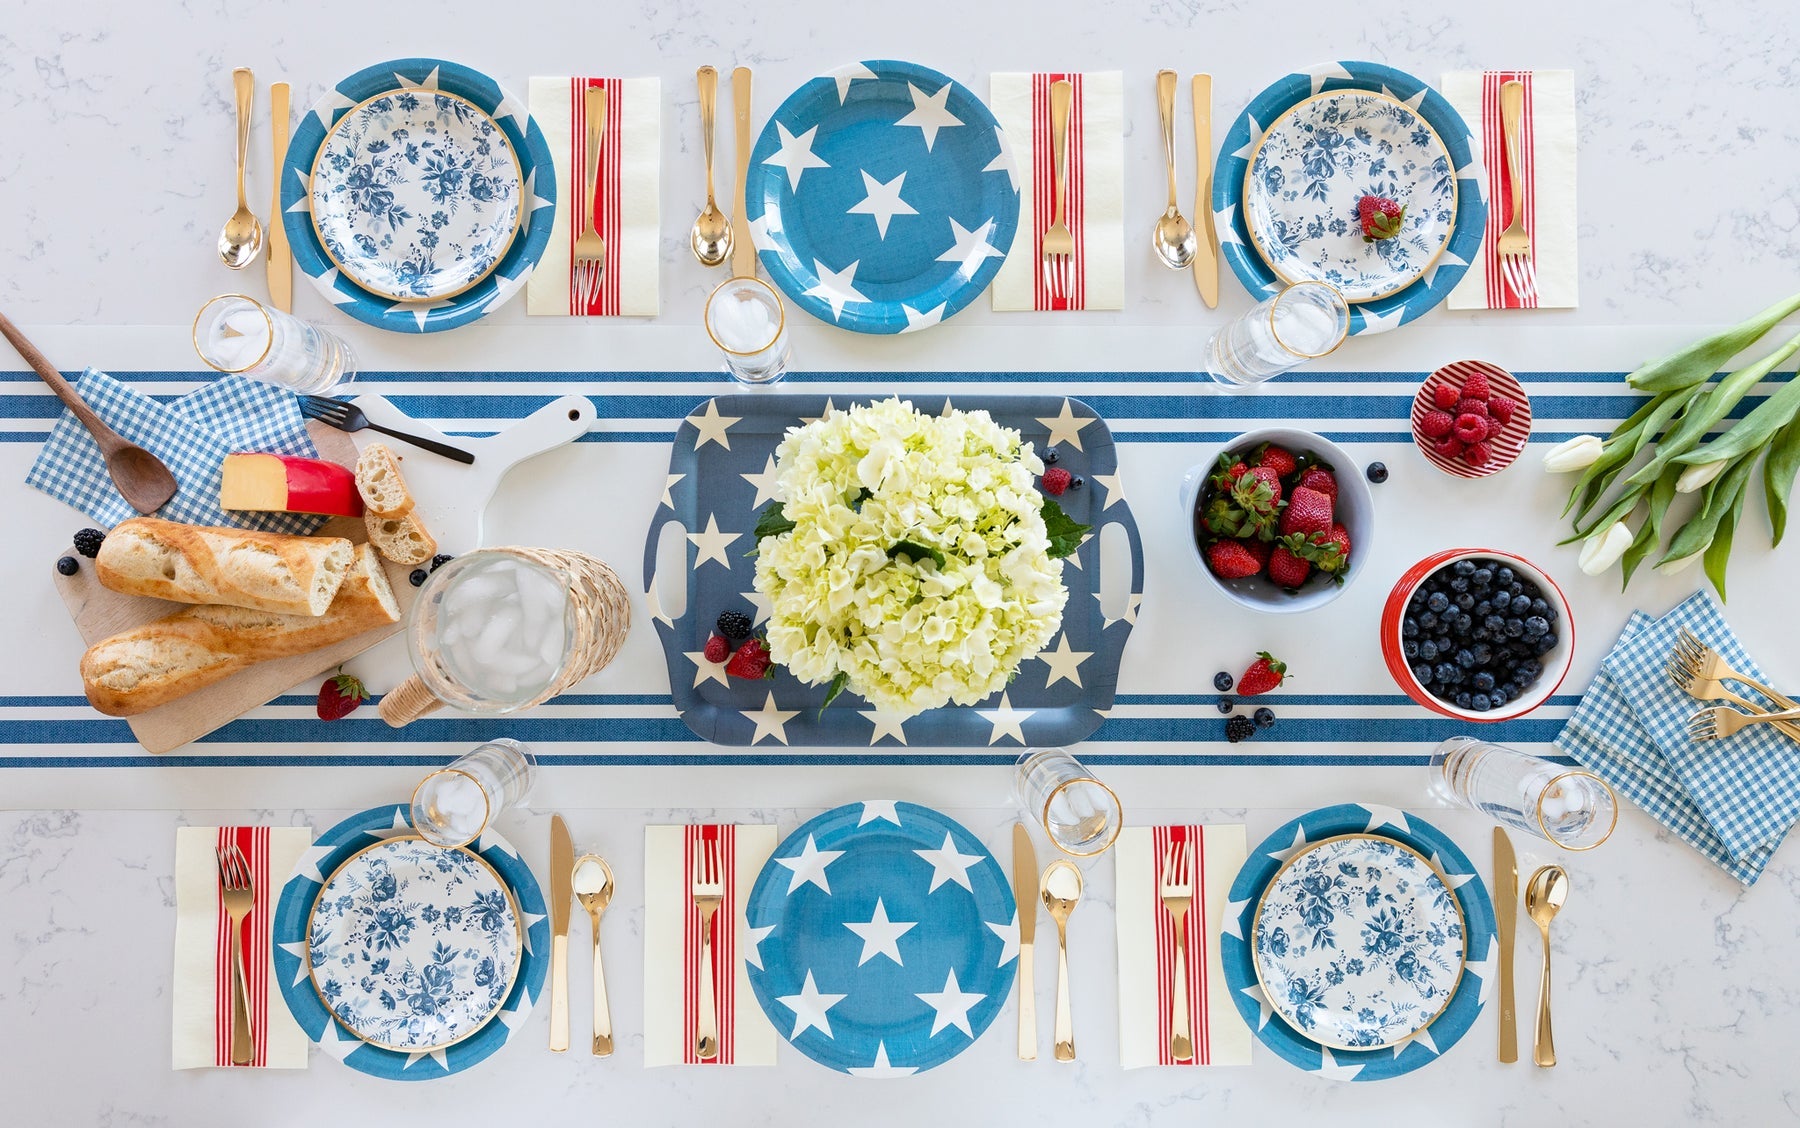 Dress up your table with an added layer of decoration with any of these tablecloths and table runners.